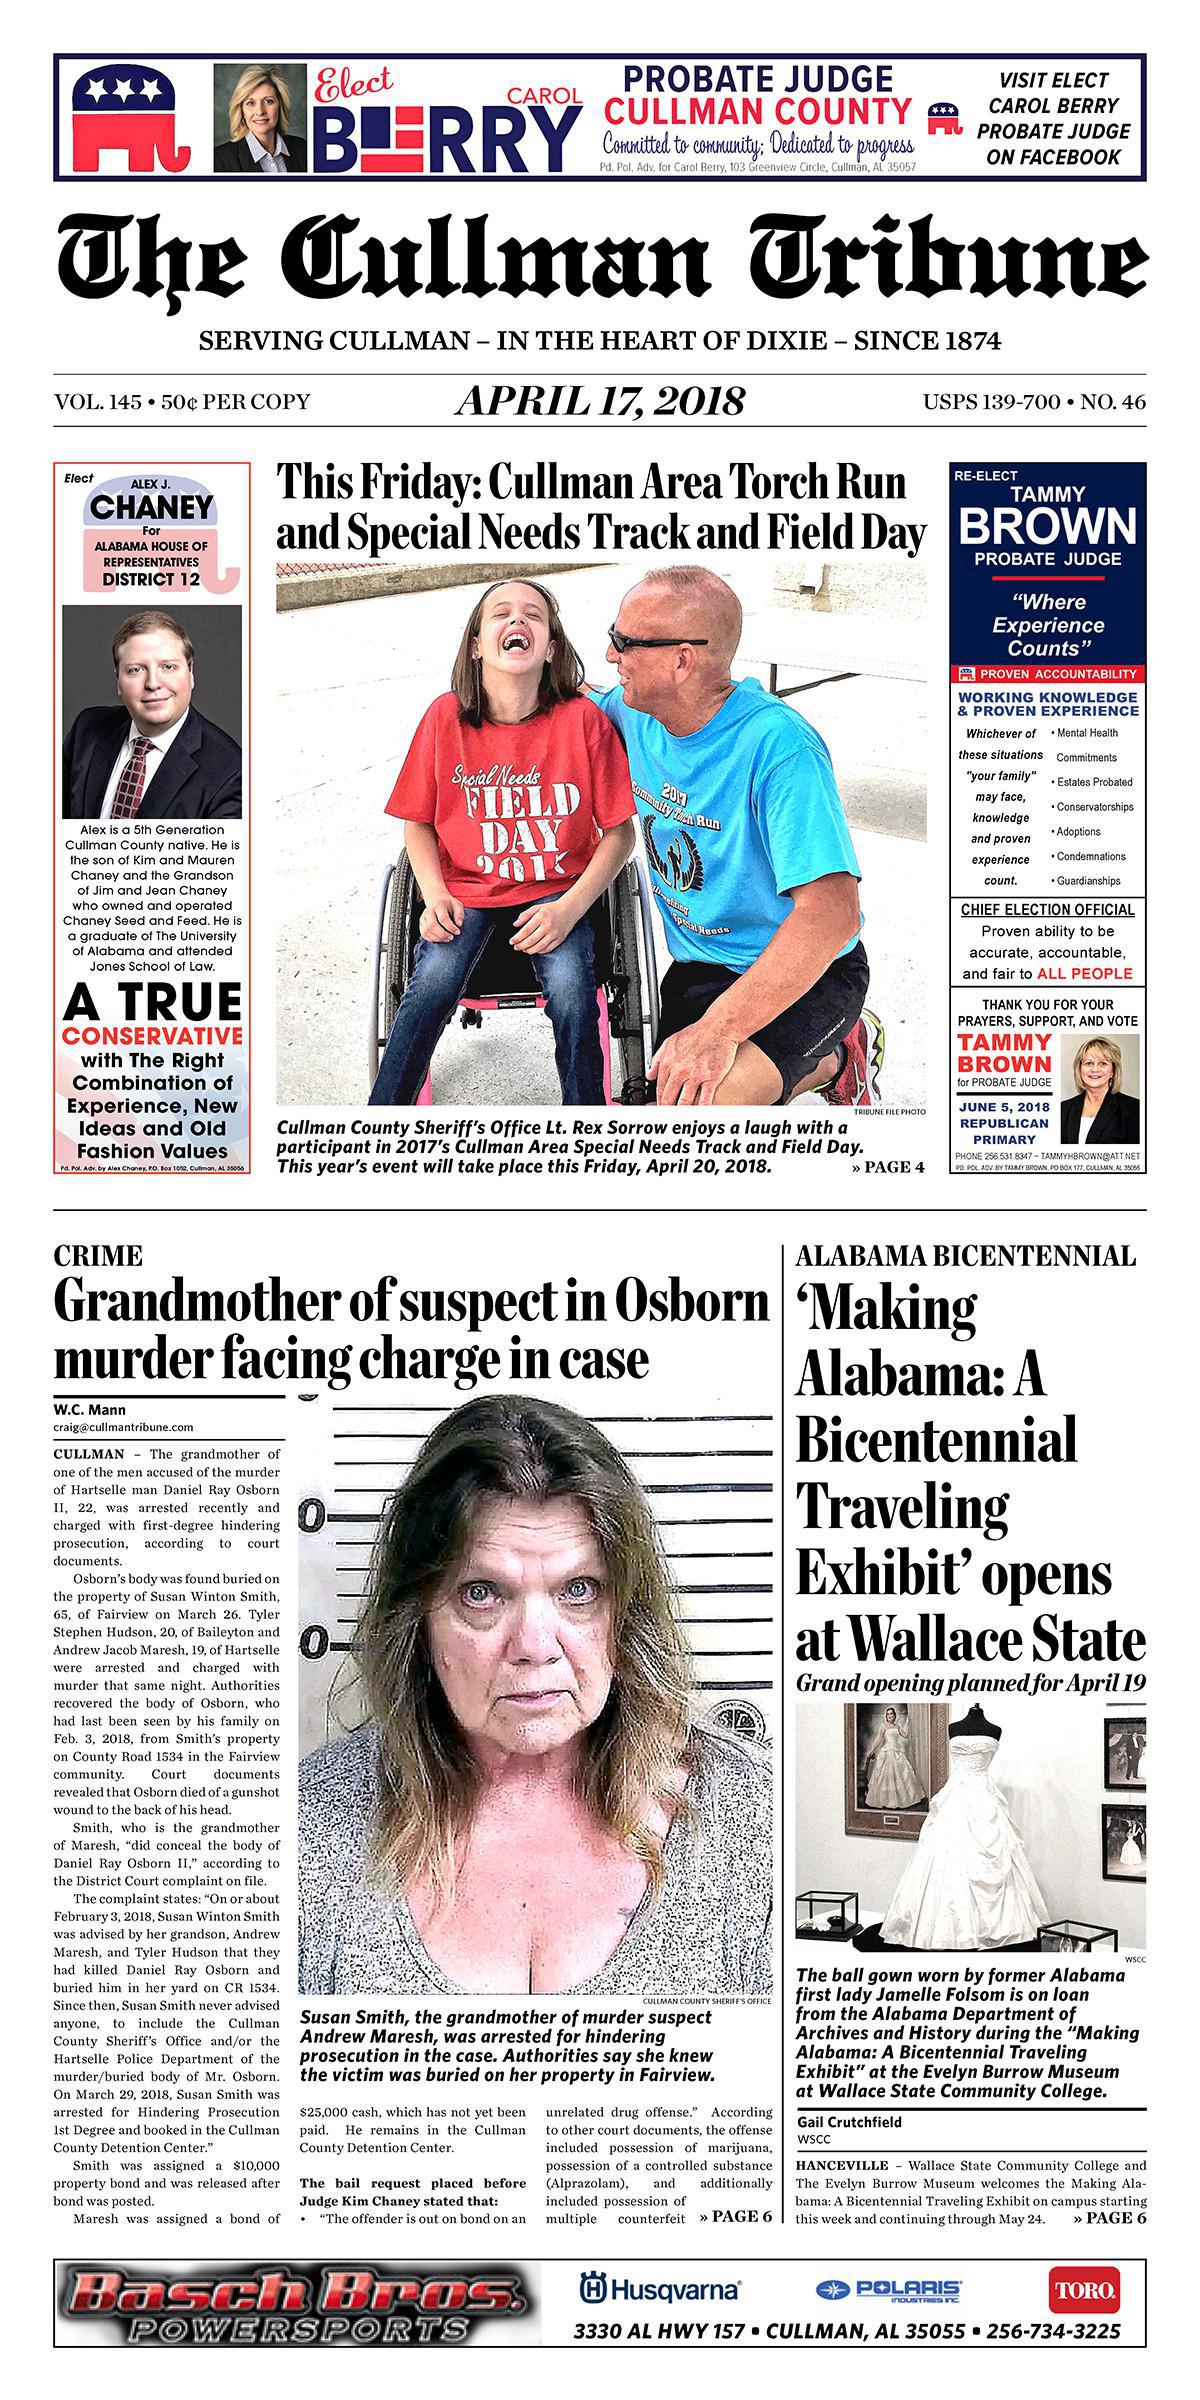 Good Morning Cullman! The 04-17-2018 edition of the Cullman Tribune is now ready to view